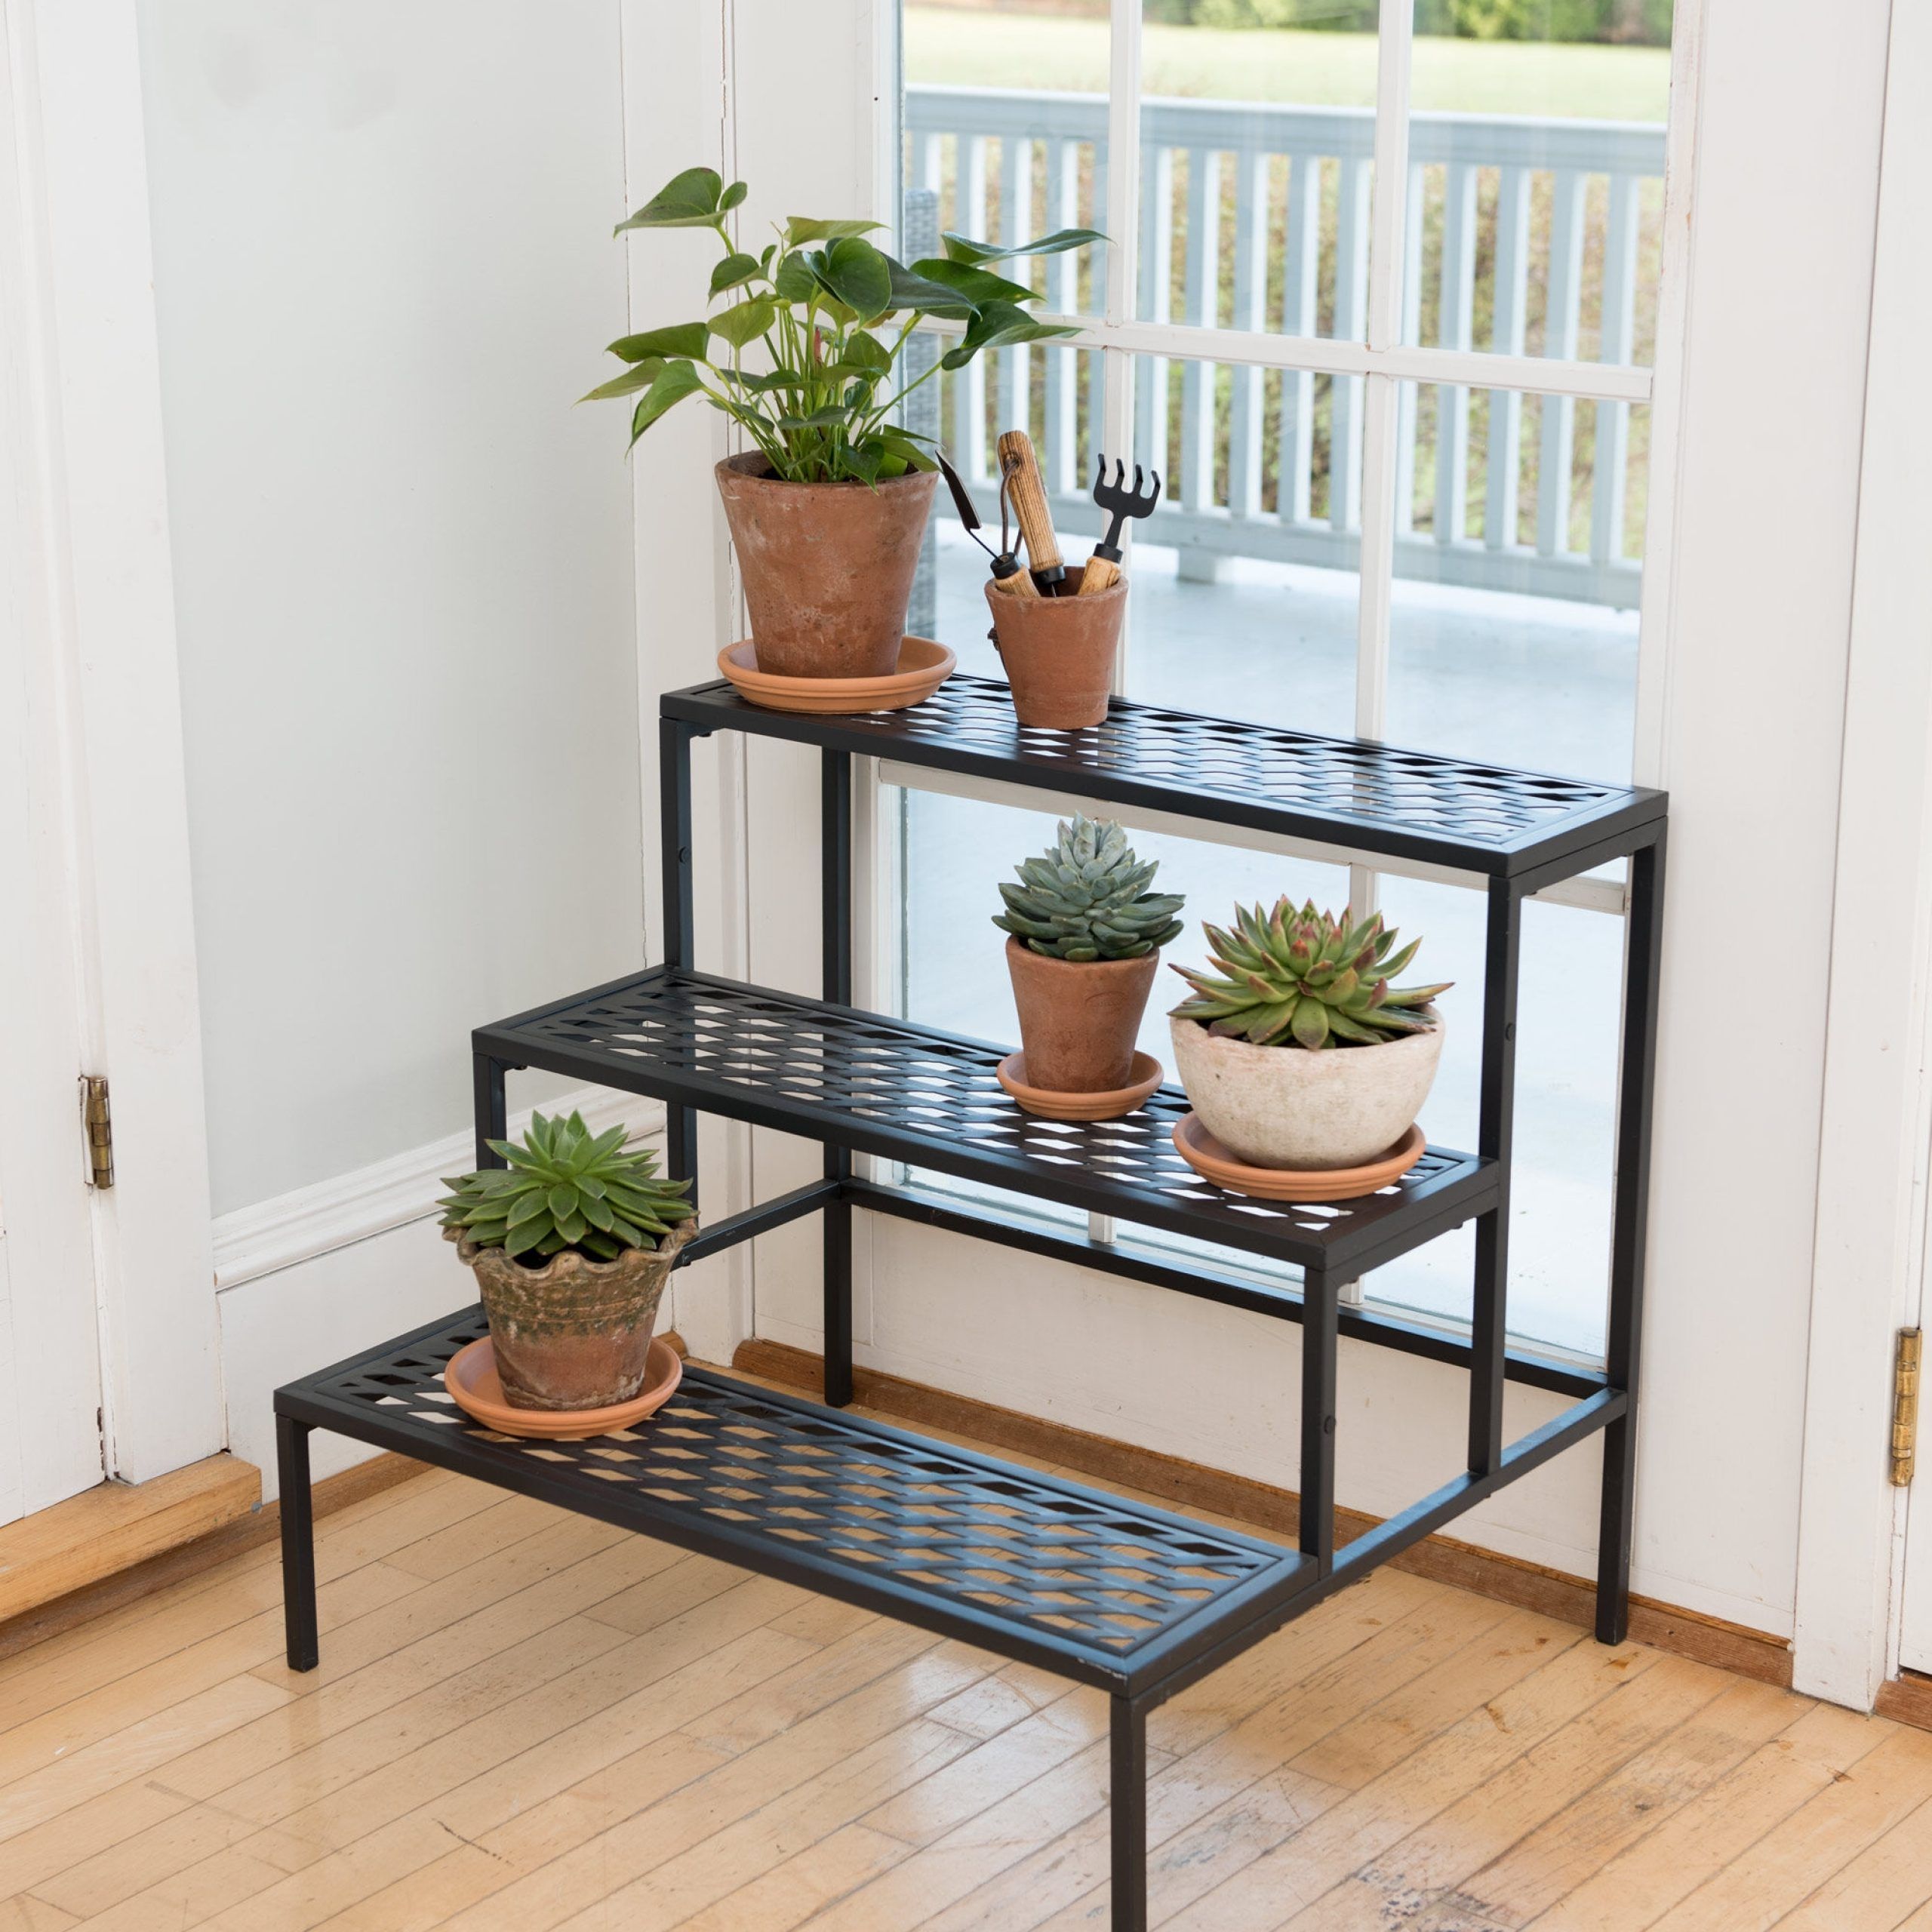 Gardener's Supply Intended For Current Three Tiered Plant Stands (View 6 of 10)